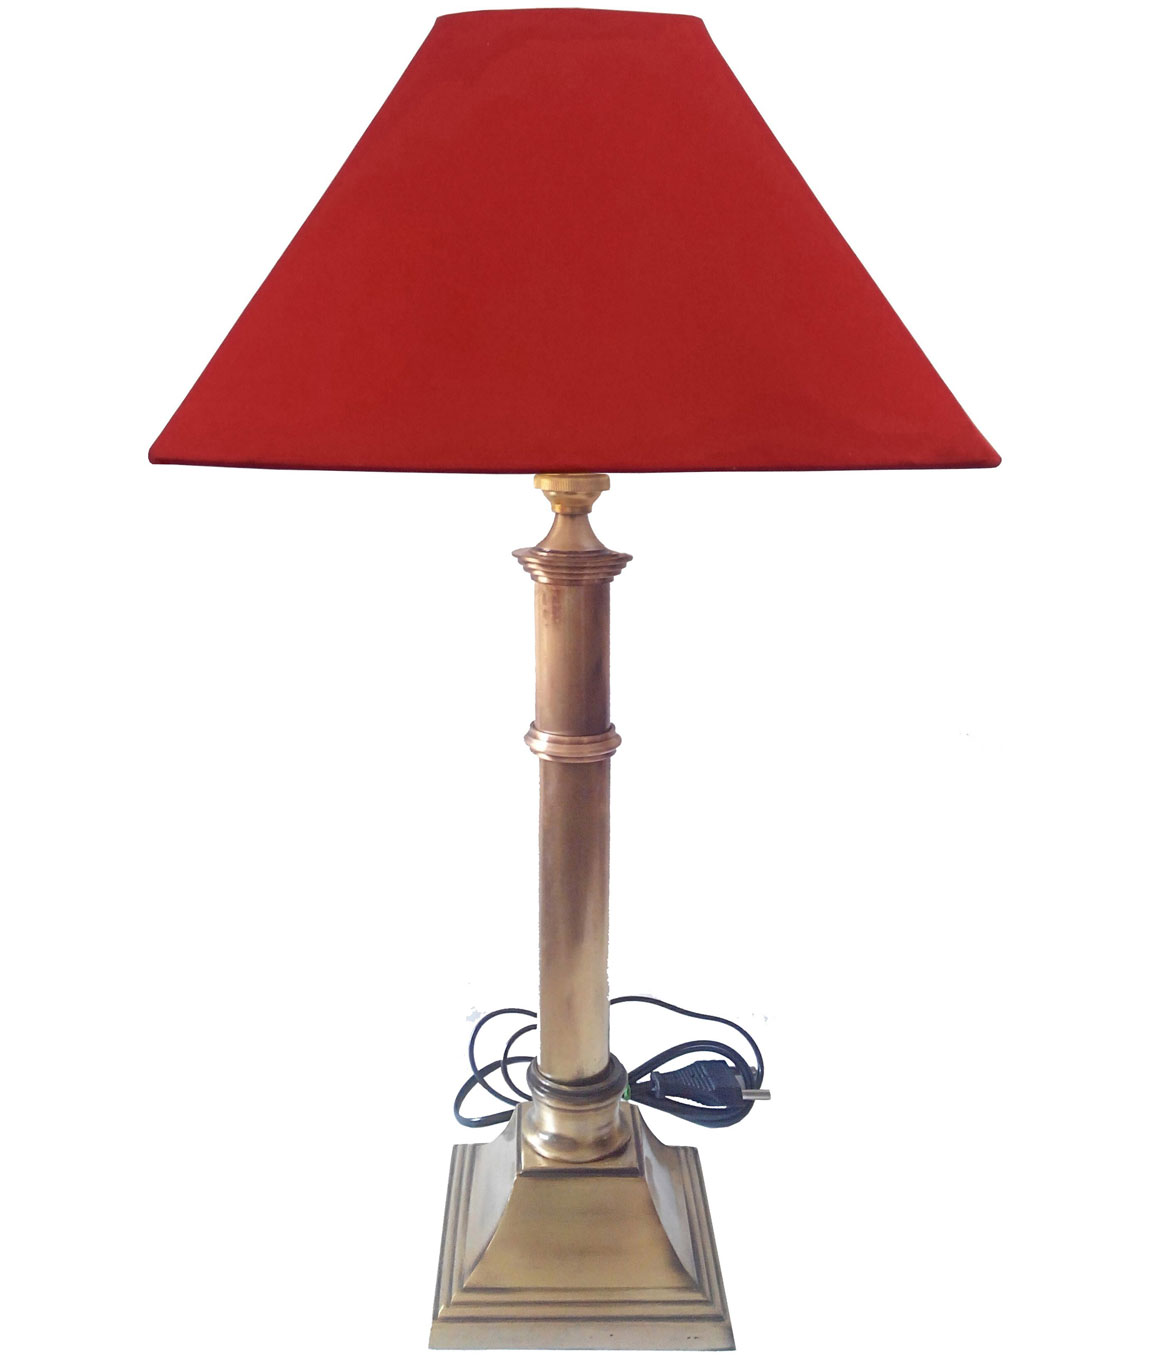 RDC Brass Plain Pillar  Table Lamp with 10 Inches Square Plain Red Lamp Shade